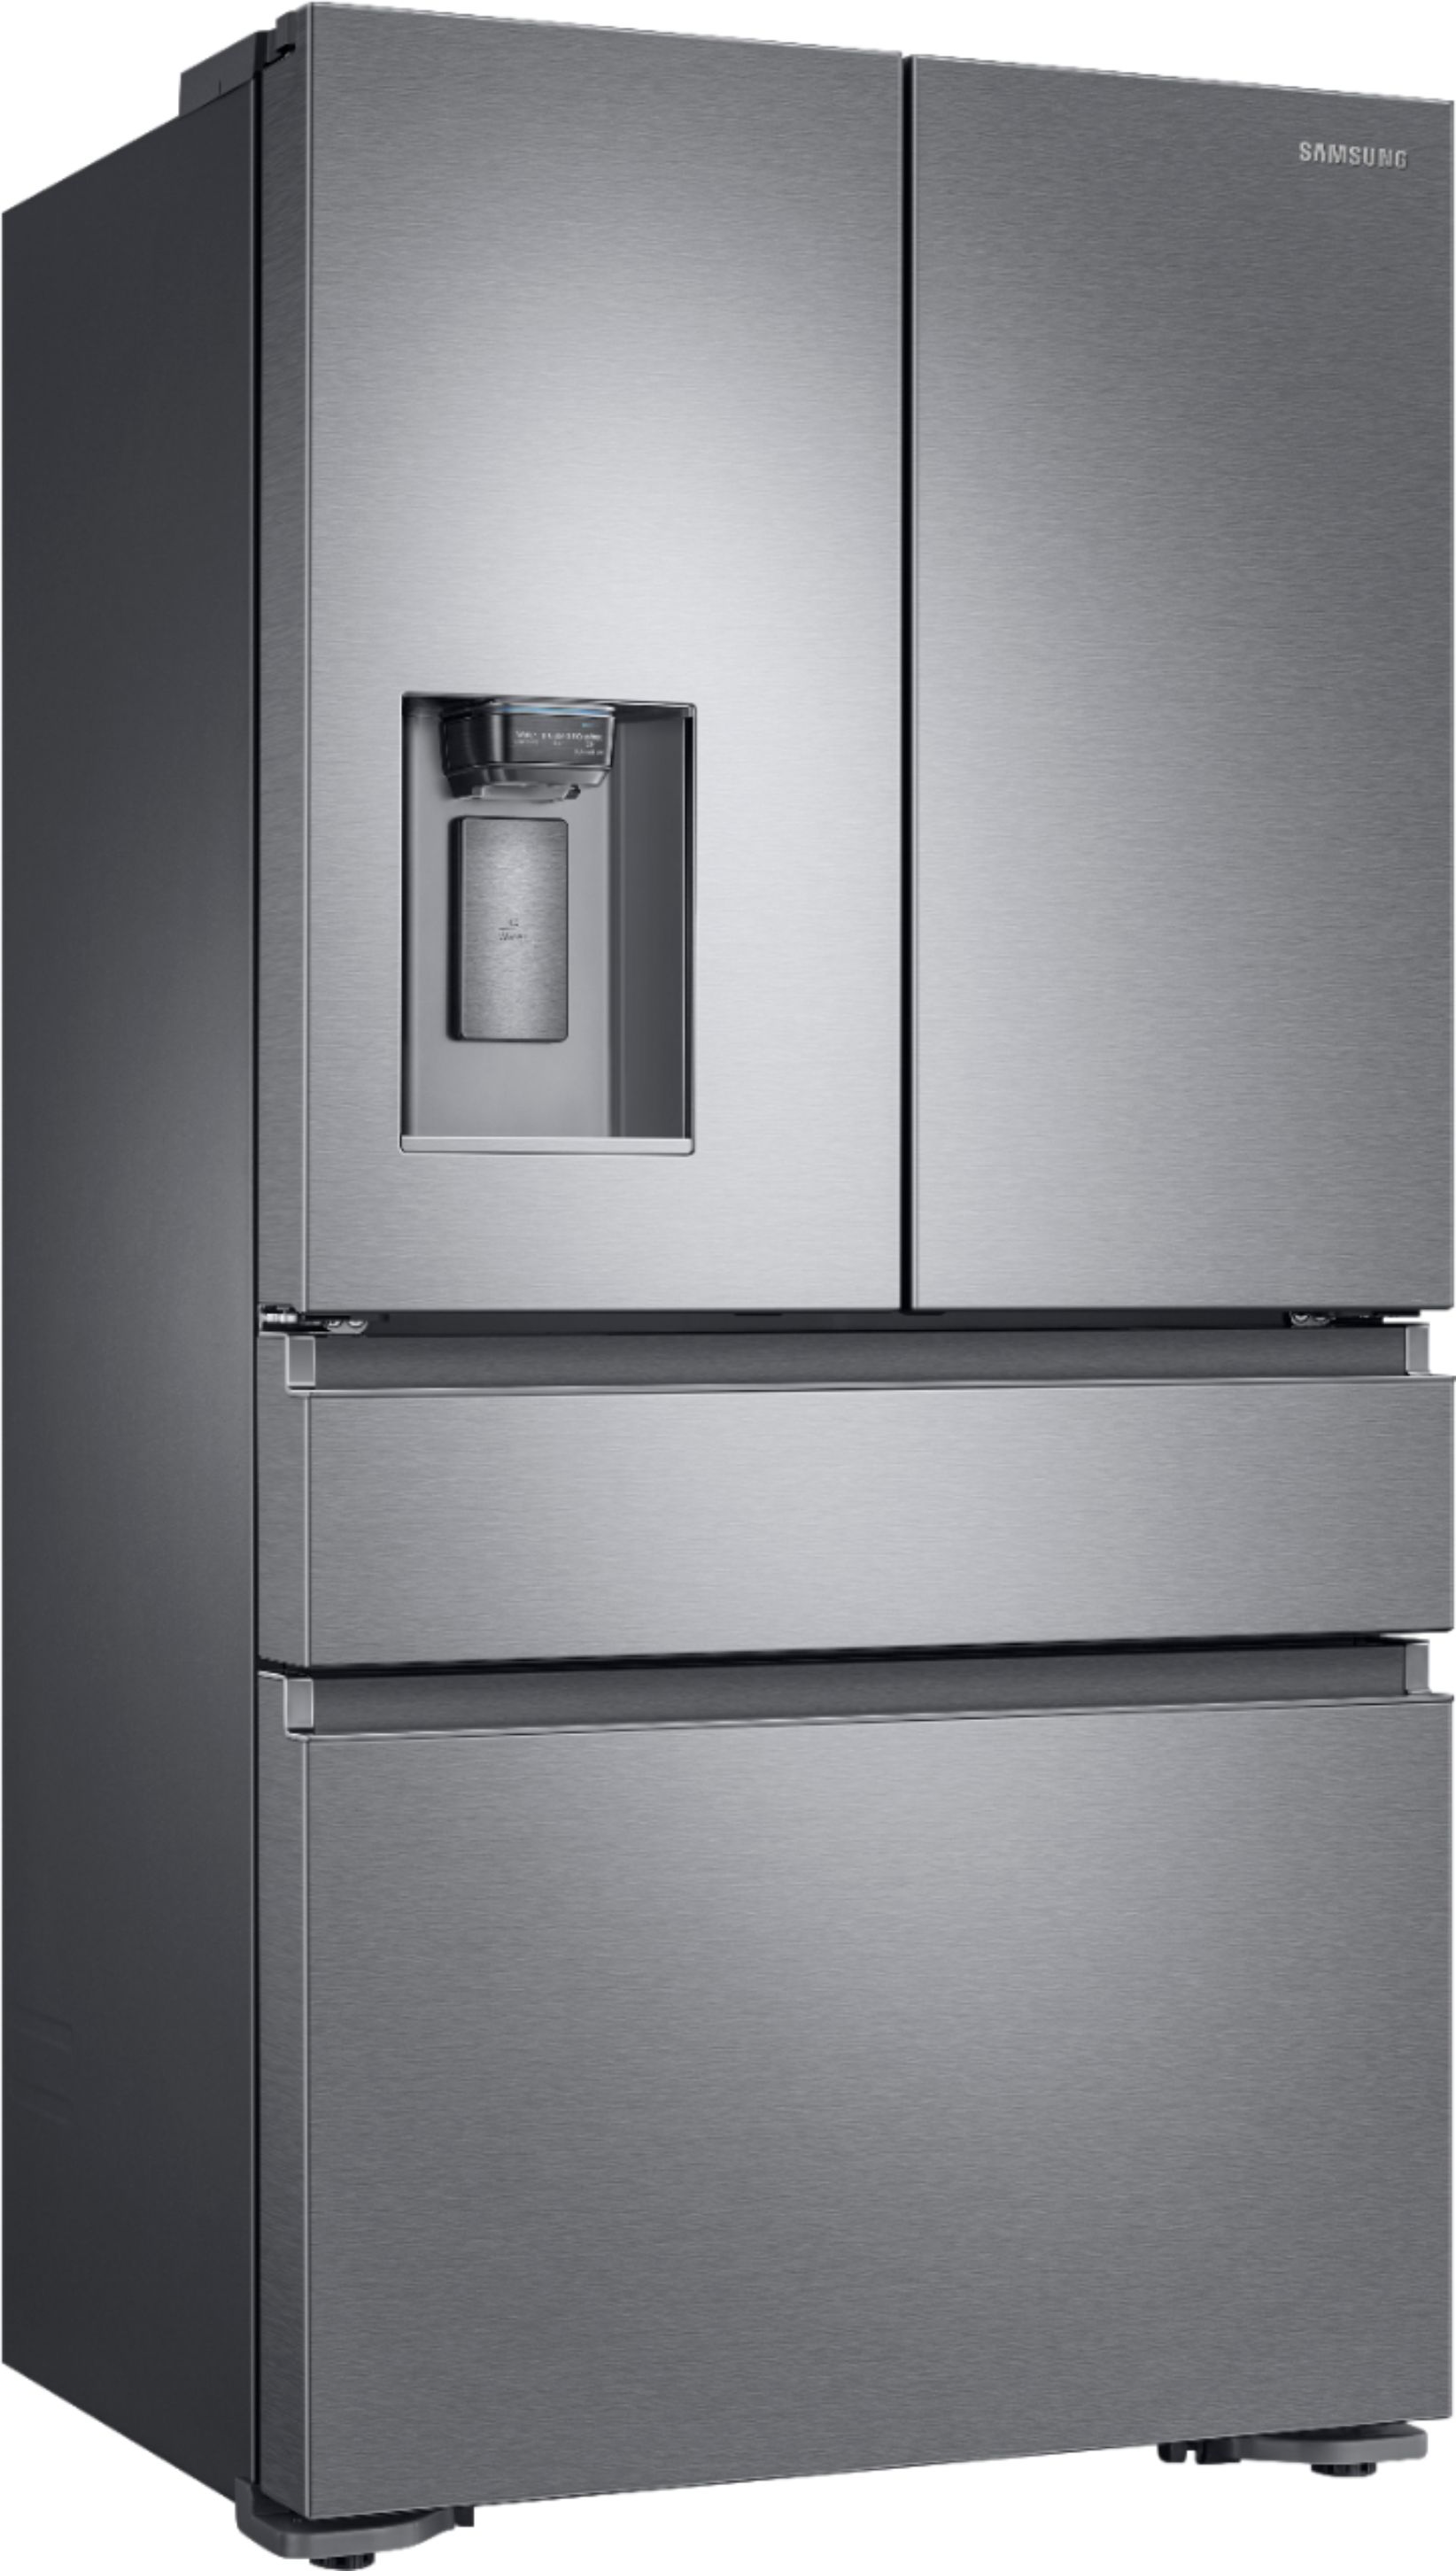 Angle View: Samsung - 22.6 cu. ft. 4-Door Flex French Door Counter Depth Refrigerator with FlexZone Drawer - Stainless Steel